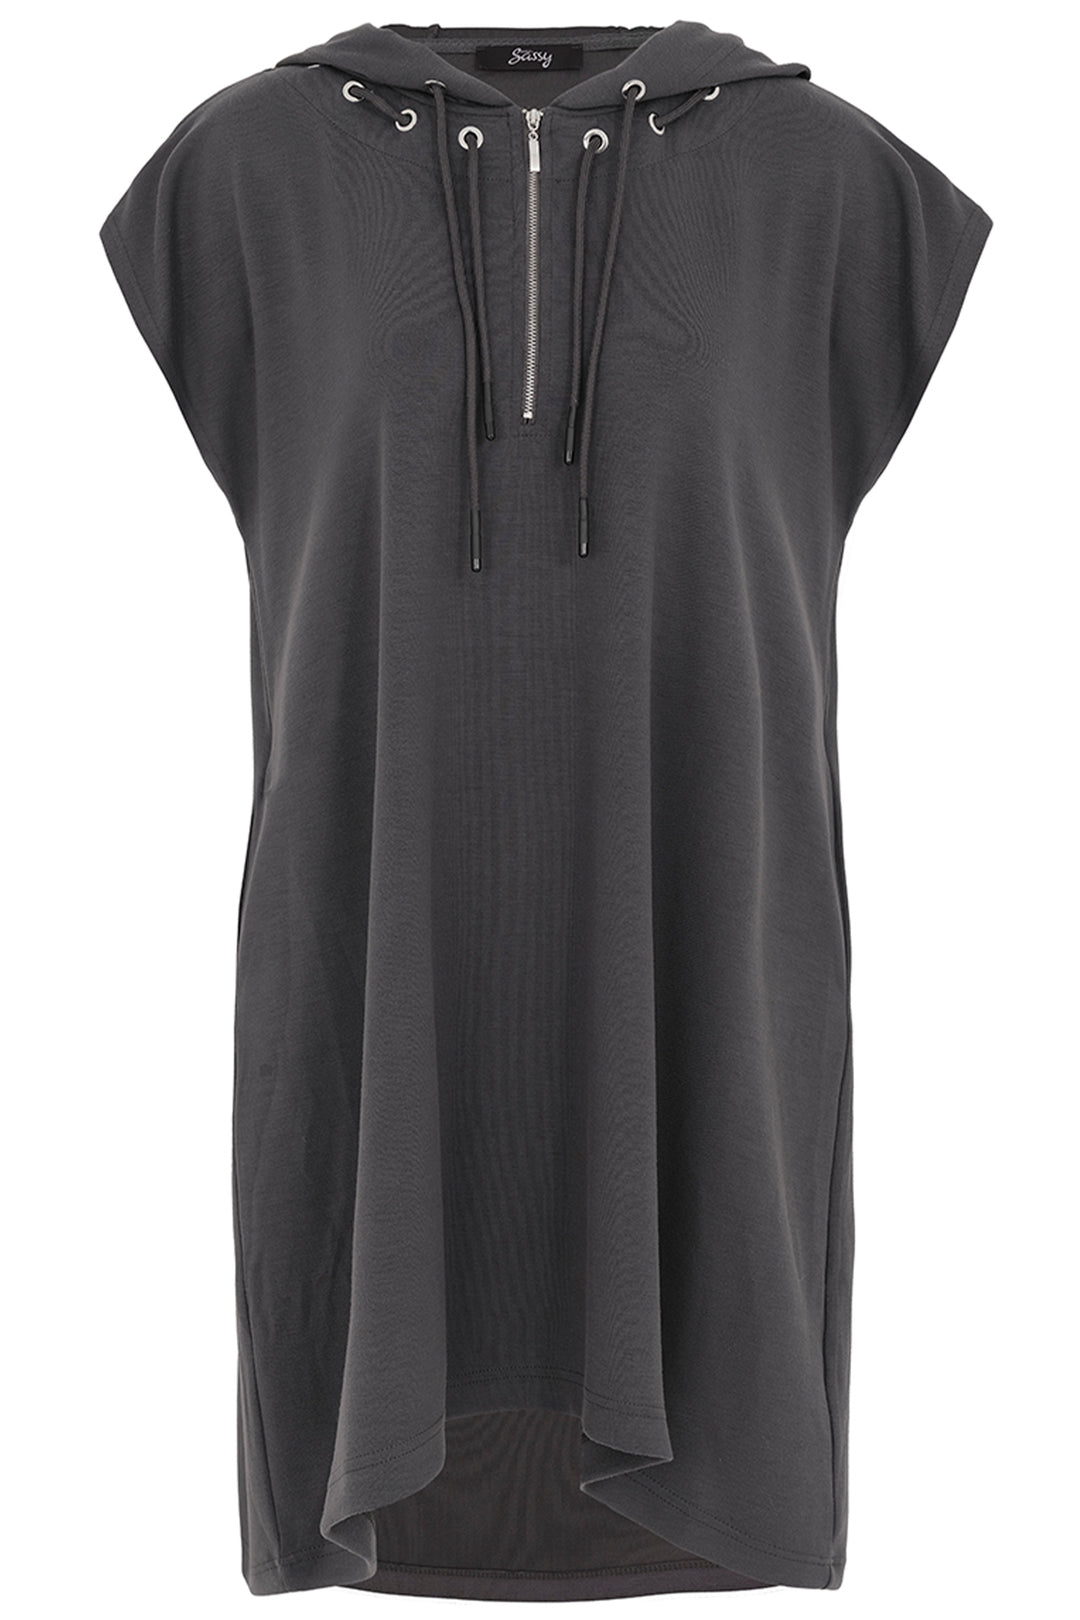 With its grommets along the neckline and a relaxed fit that ensures comfort, this dress is the ideal companion for your next event. Dress it up or down, this knit dress is the perfect choice for all your wardrobe needs.